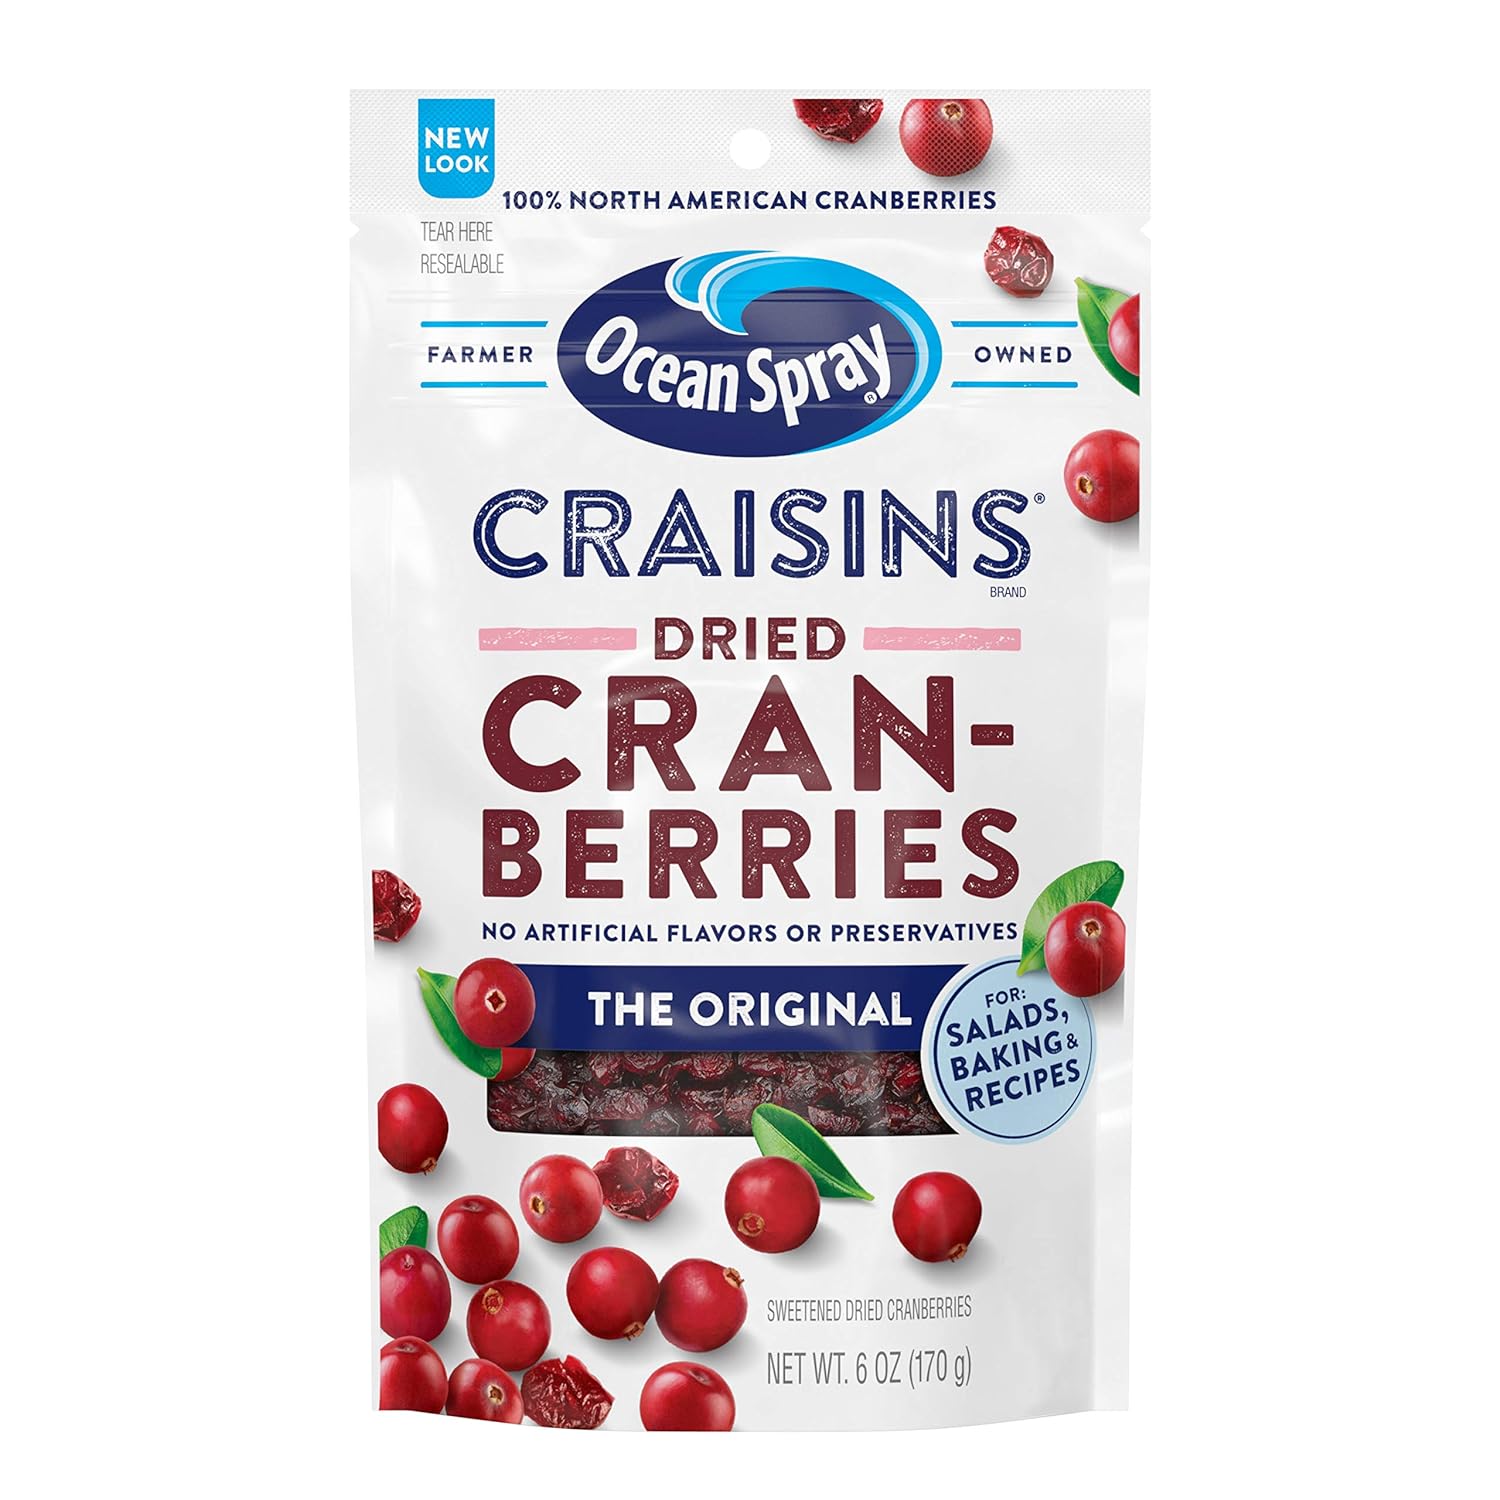 Ocean Spray Craisins Dried Cranberries: A Versatile and Delicious Snack Review